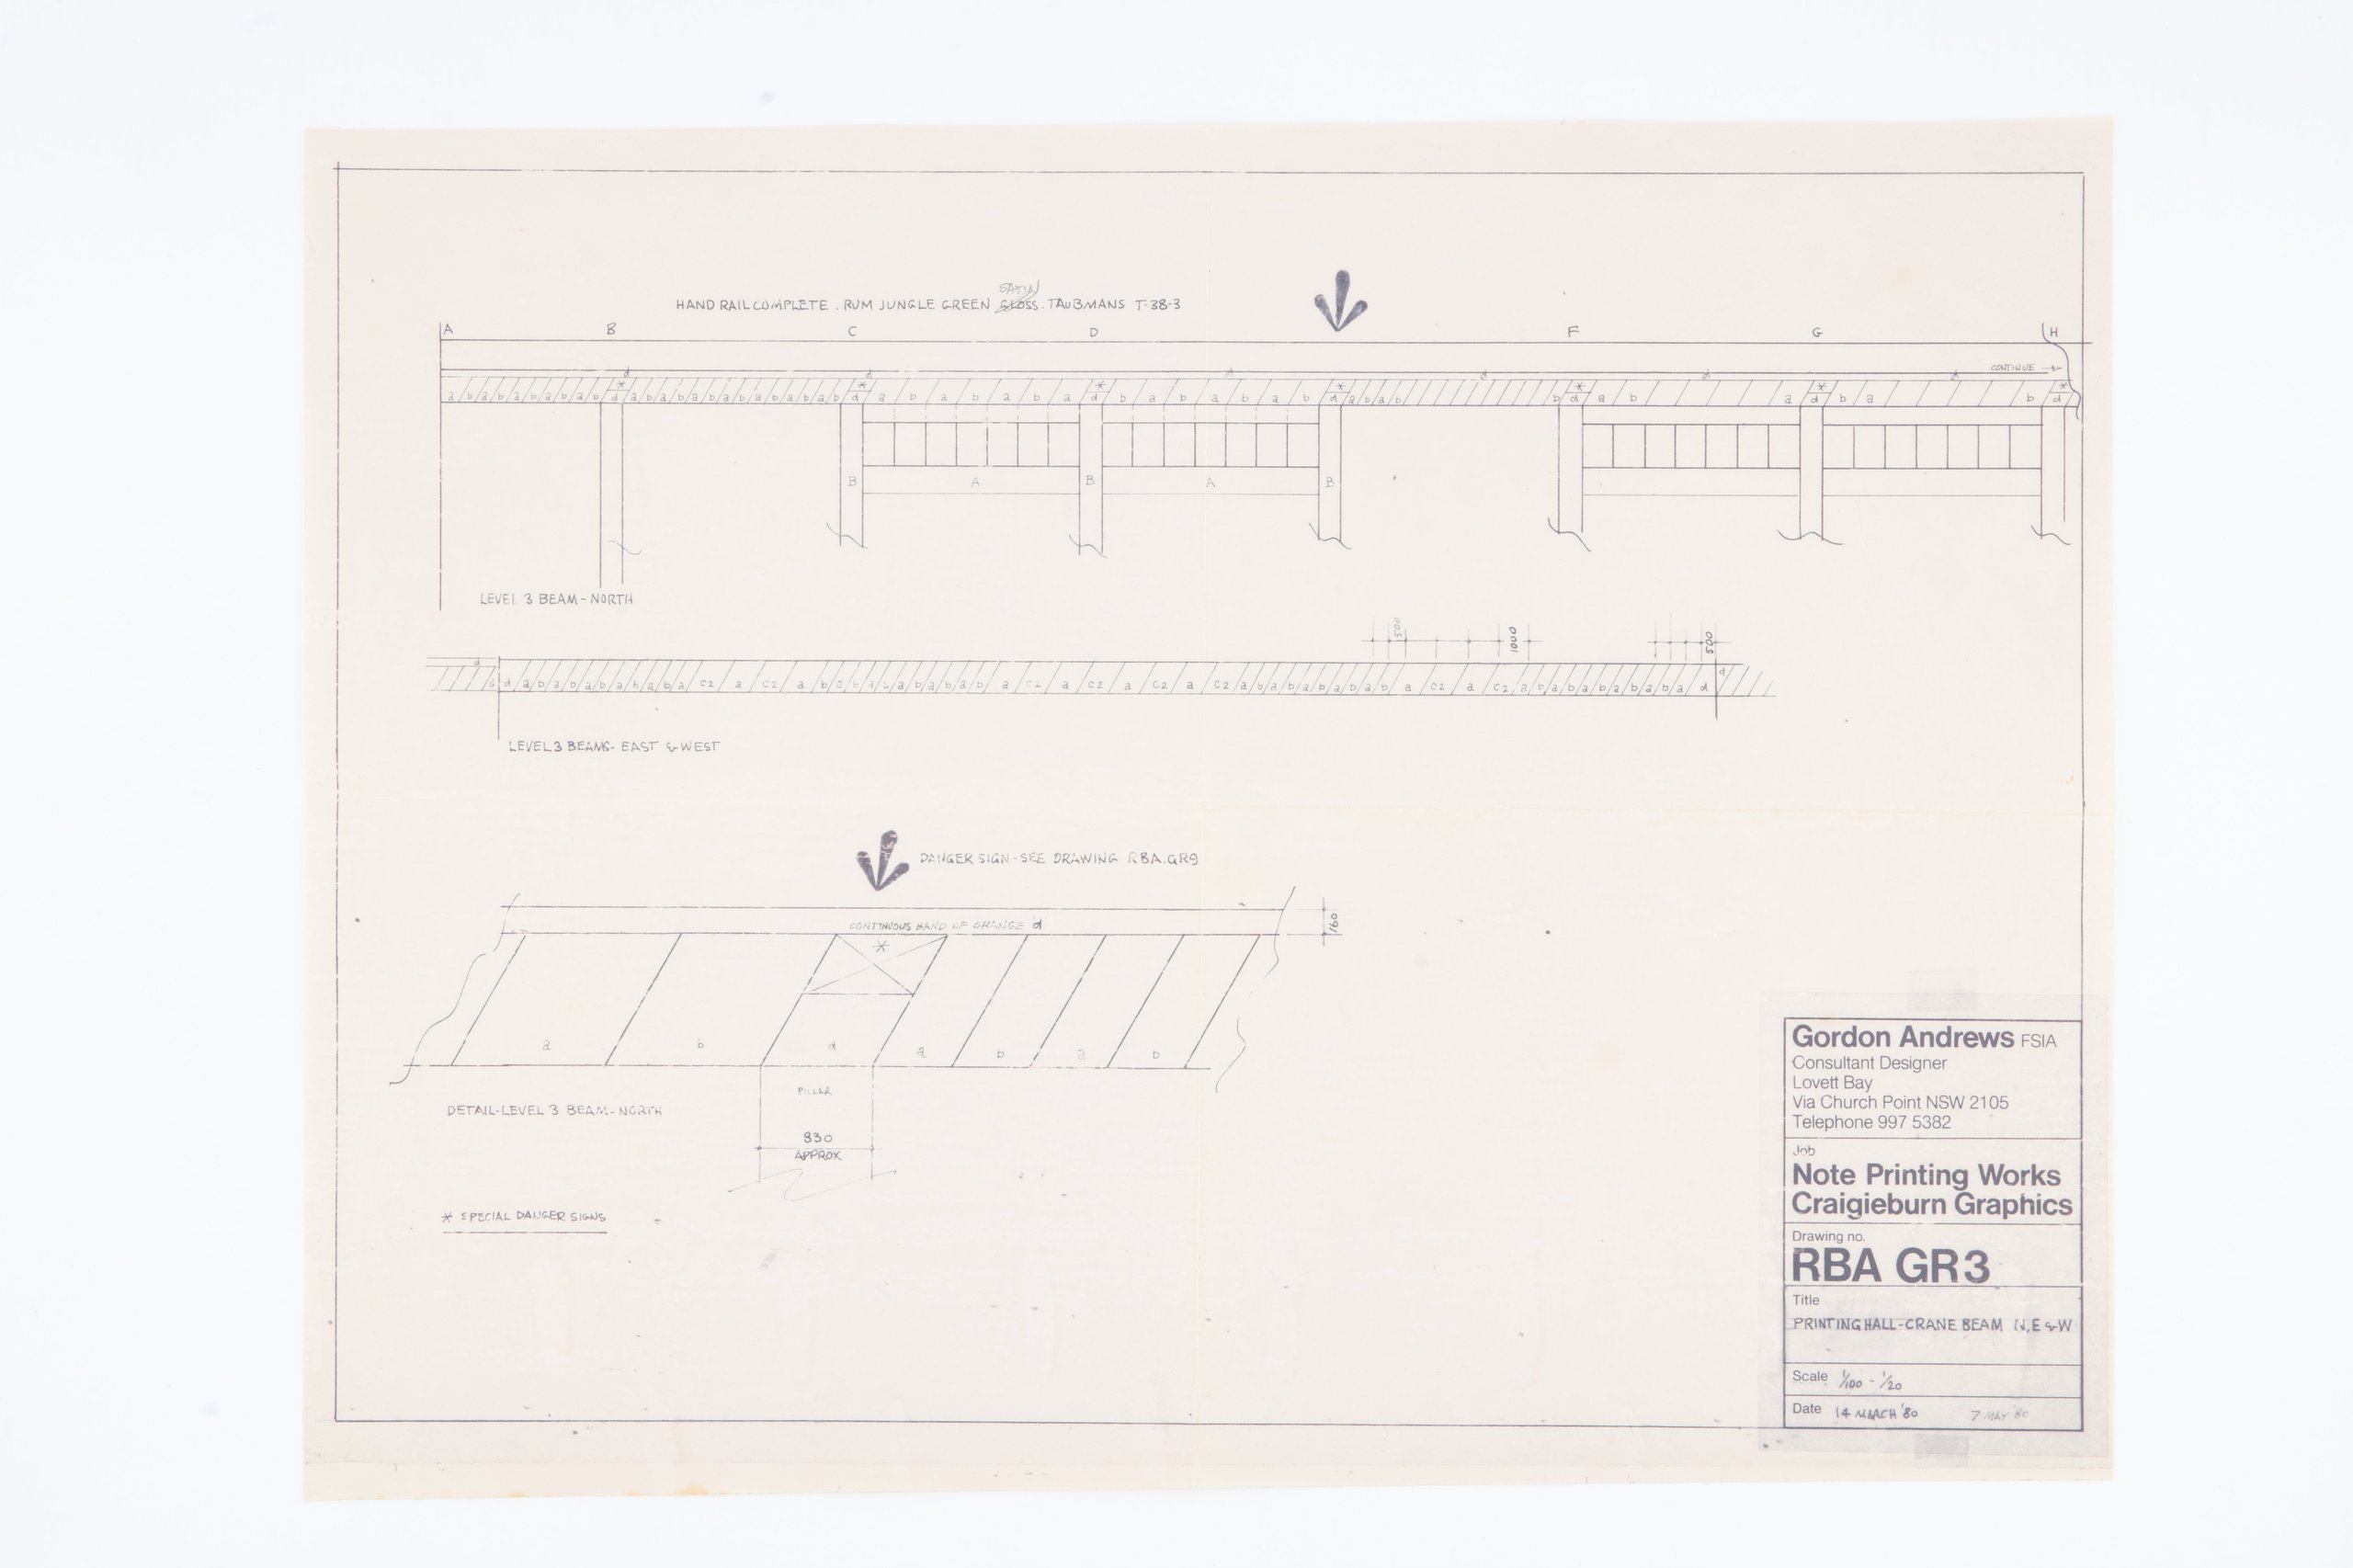 Design work for the RBA's banknote printing works by Gordon Andrews